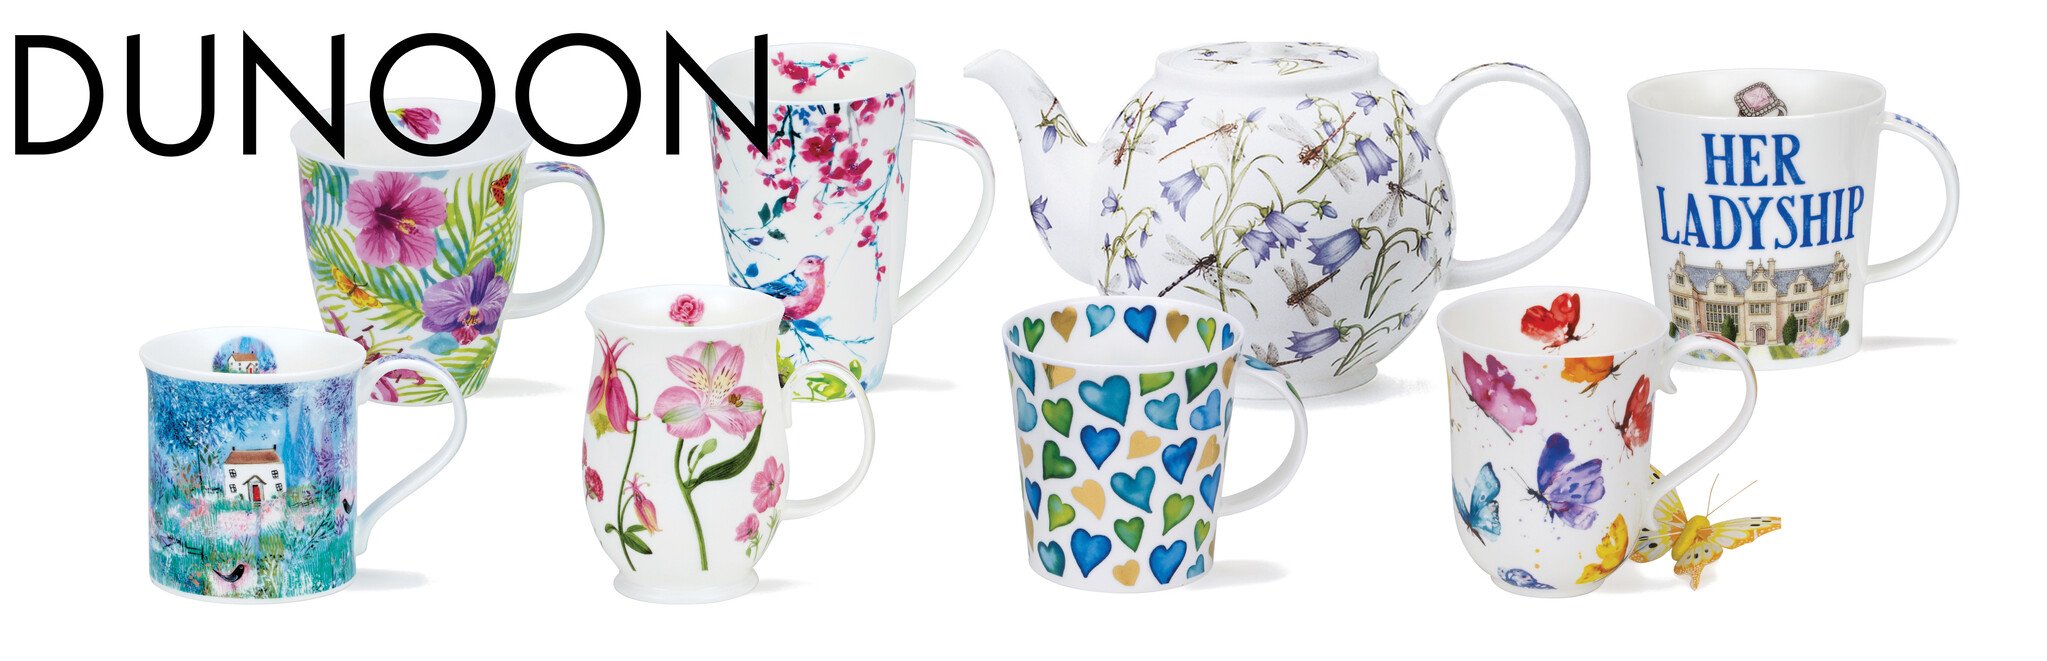 Samples of Dunoon mugs and teapots